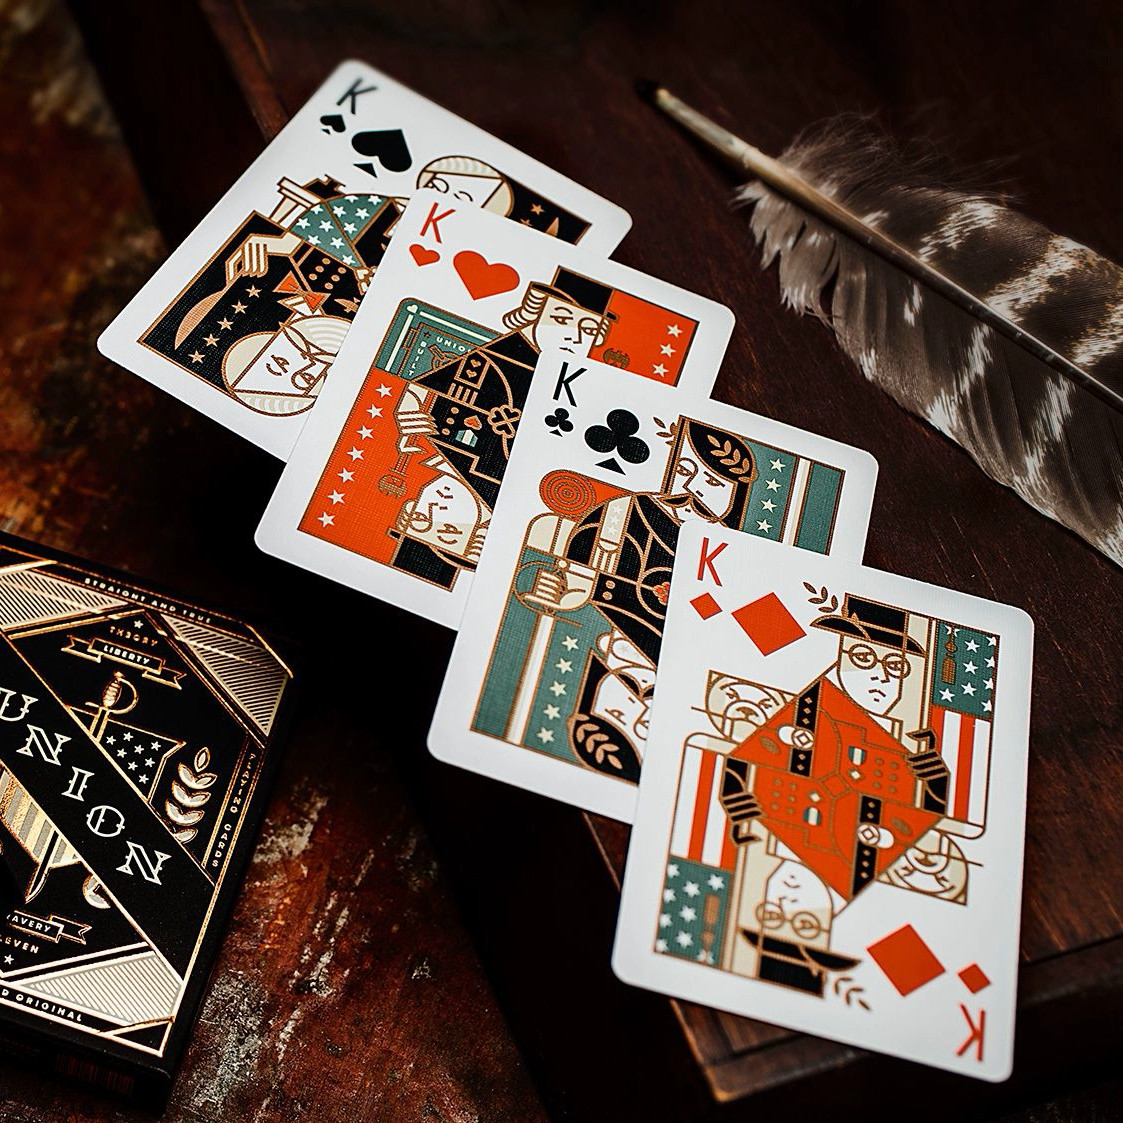 Union playing cards - фото 3 - id-p88093402